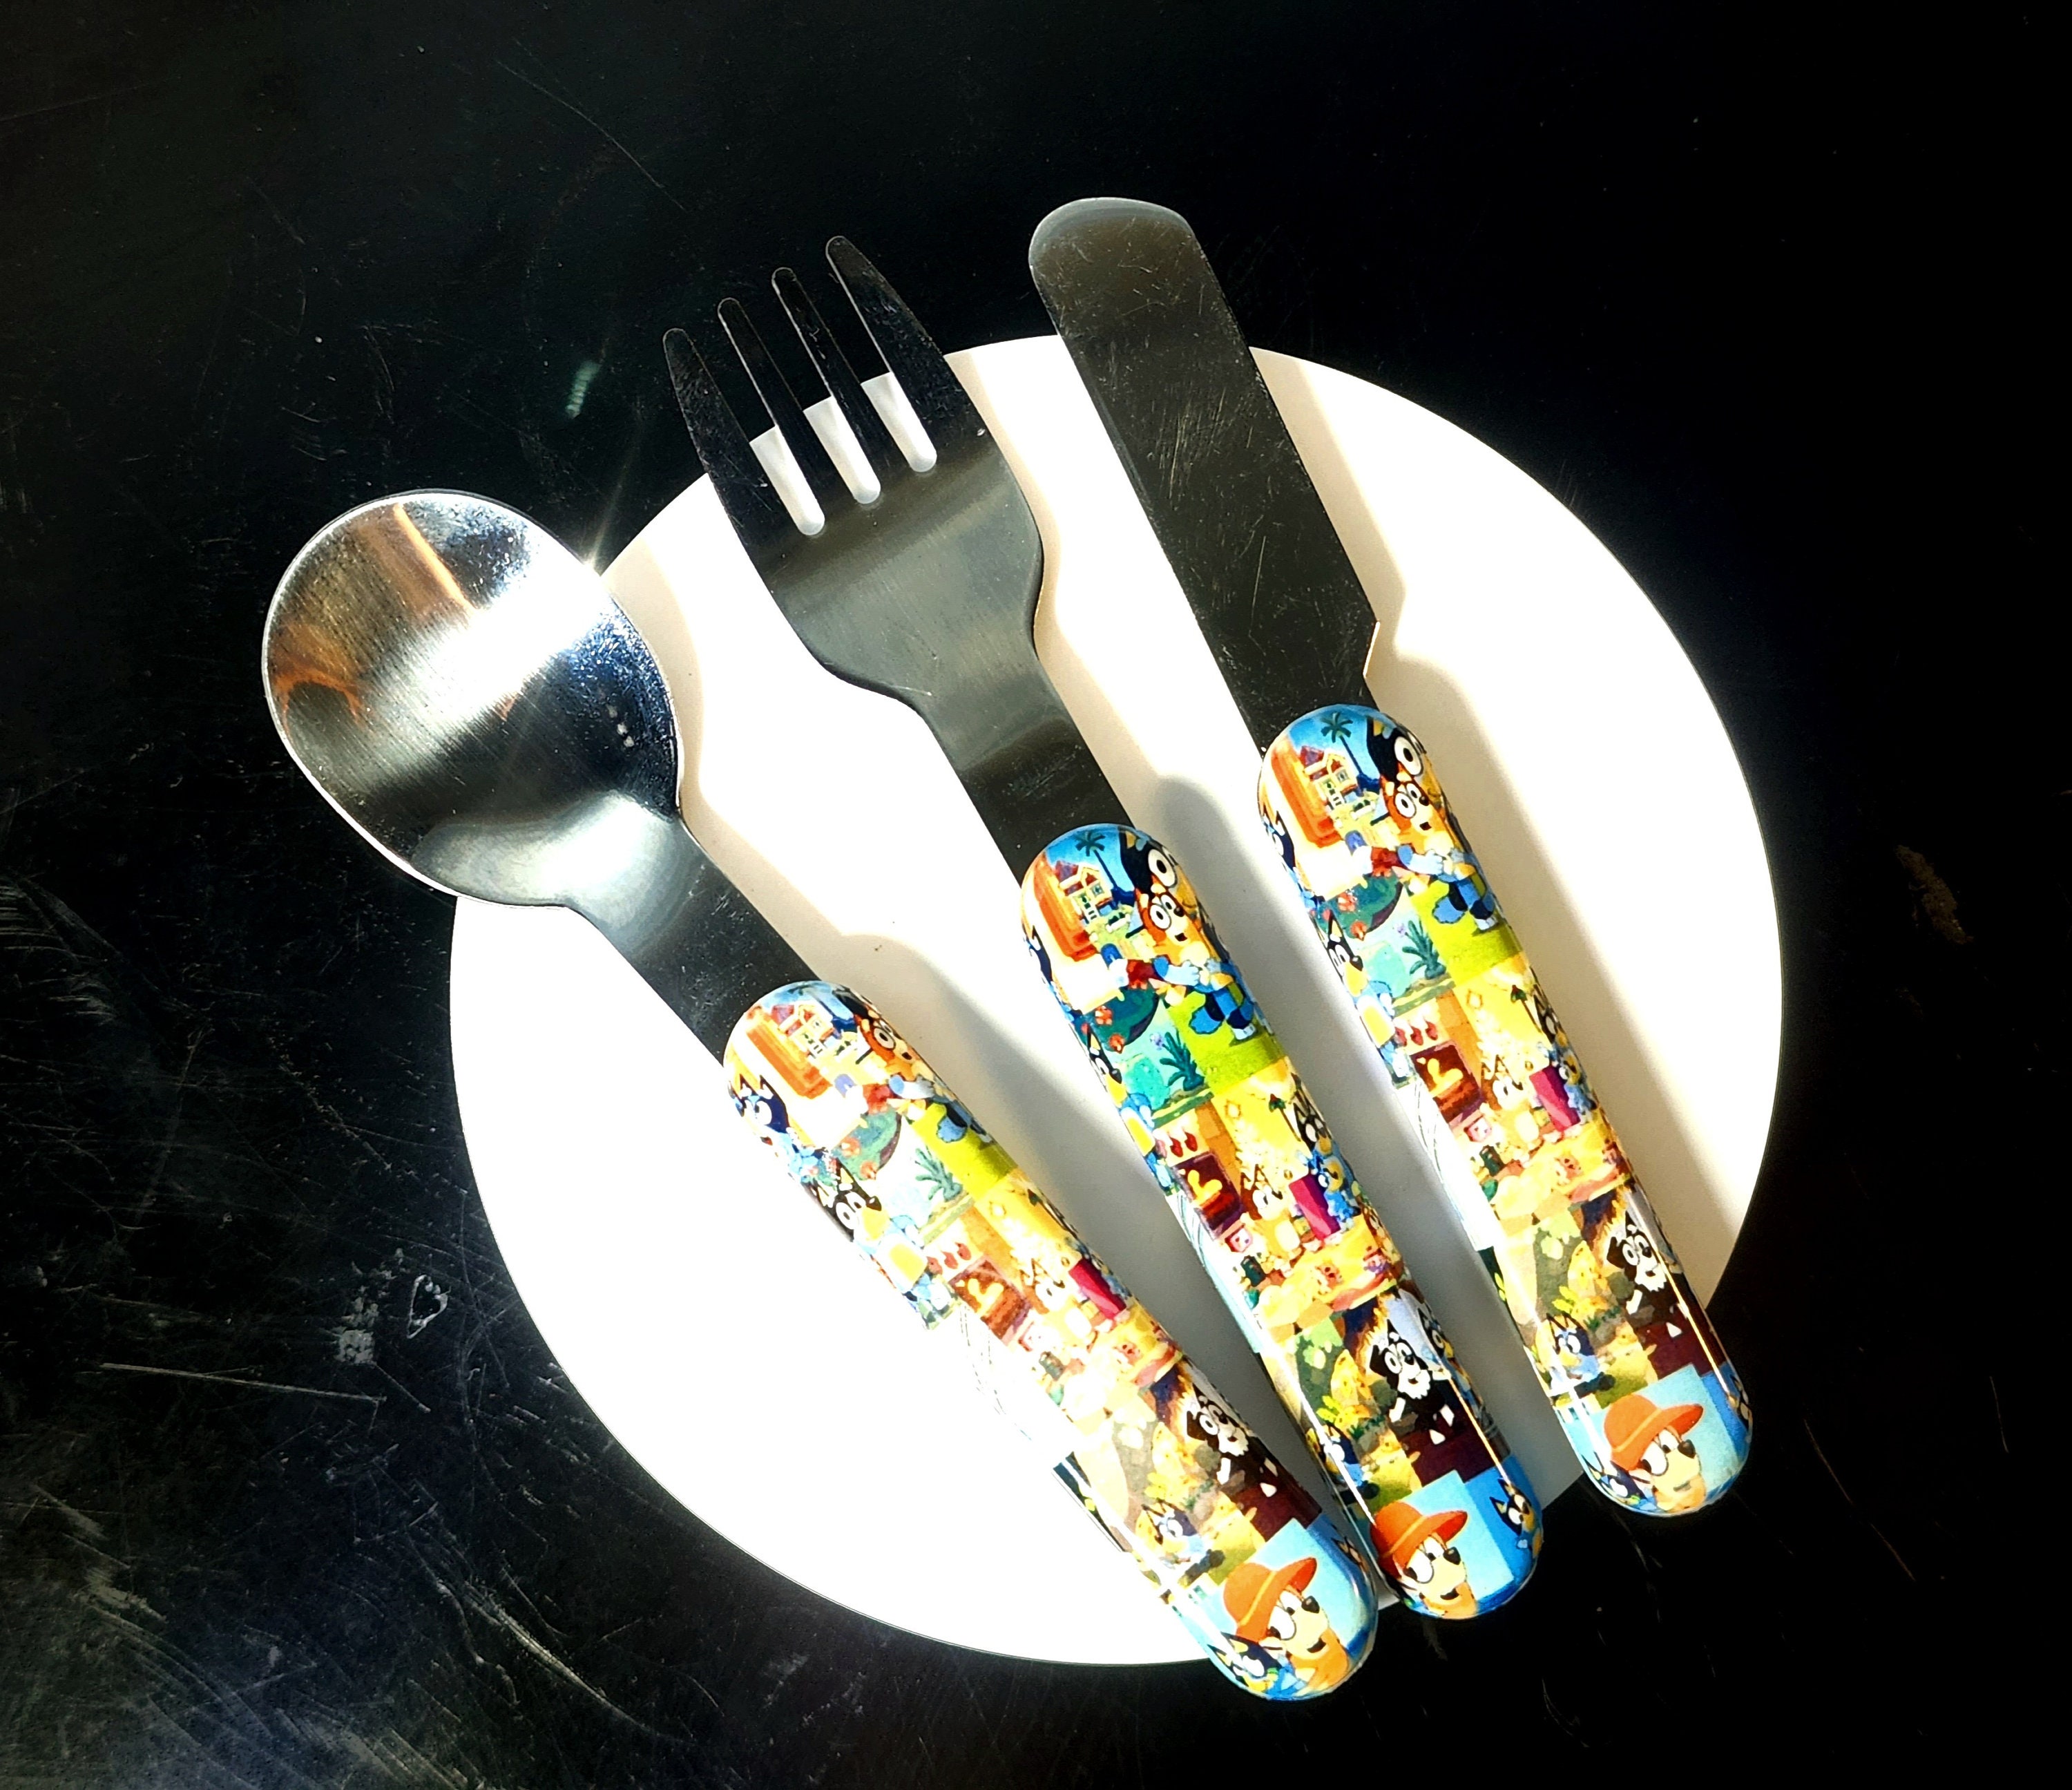 Toddler Learning Cutlery Utensils, Kids Silverware with Silicone Handle